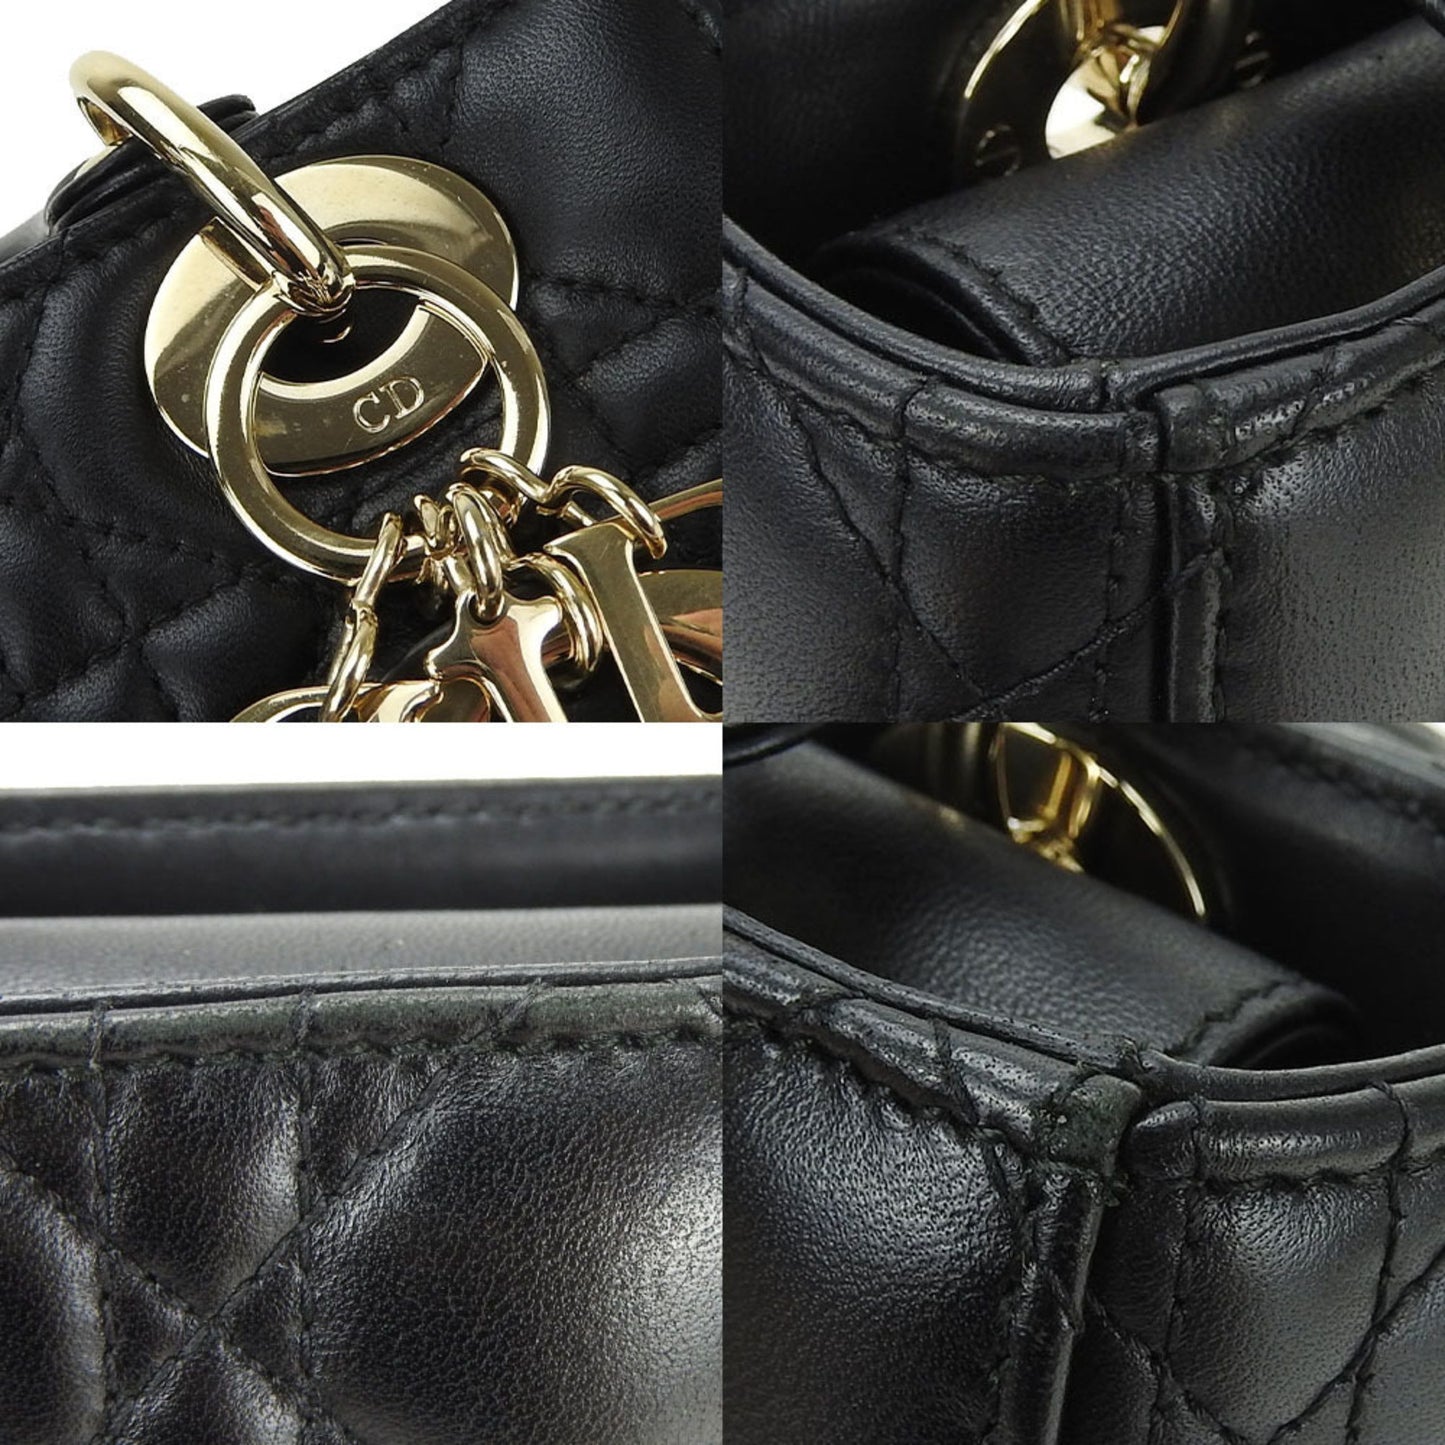 Dior Women's Iconic Black Leather Handbag by Christian Dior in Black